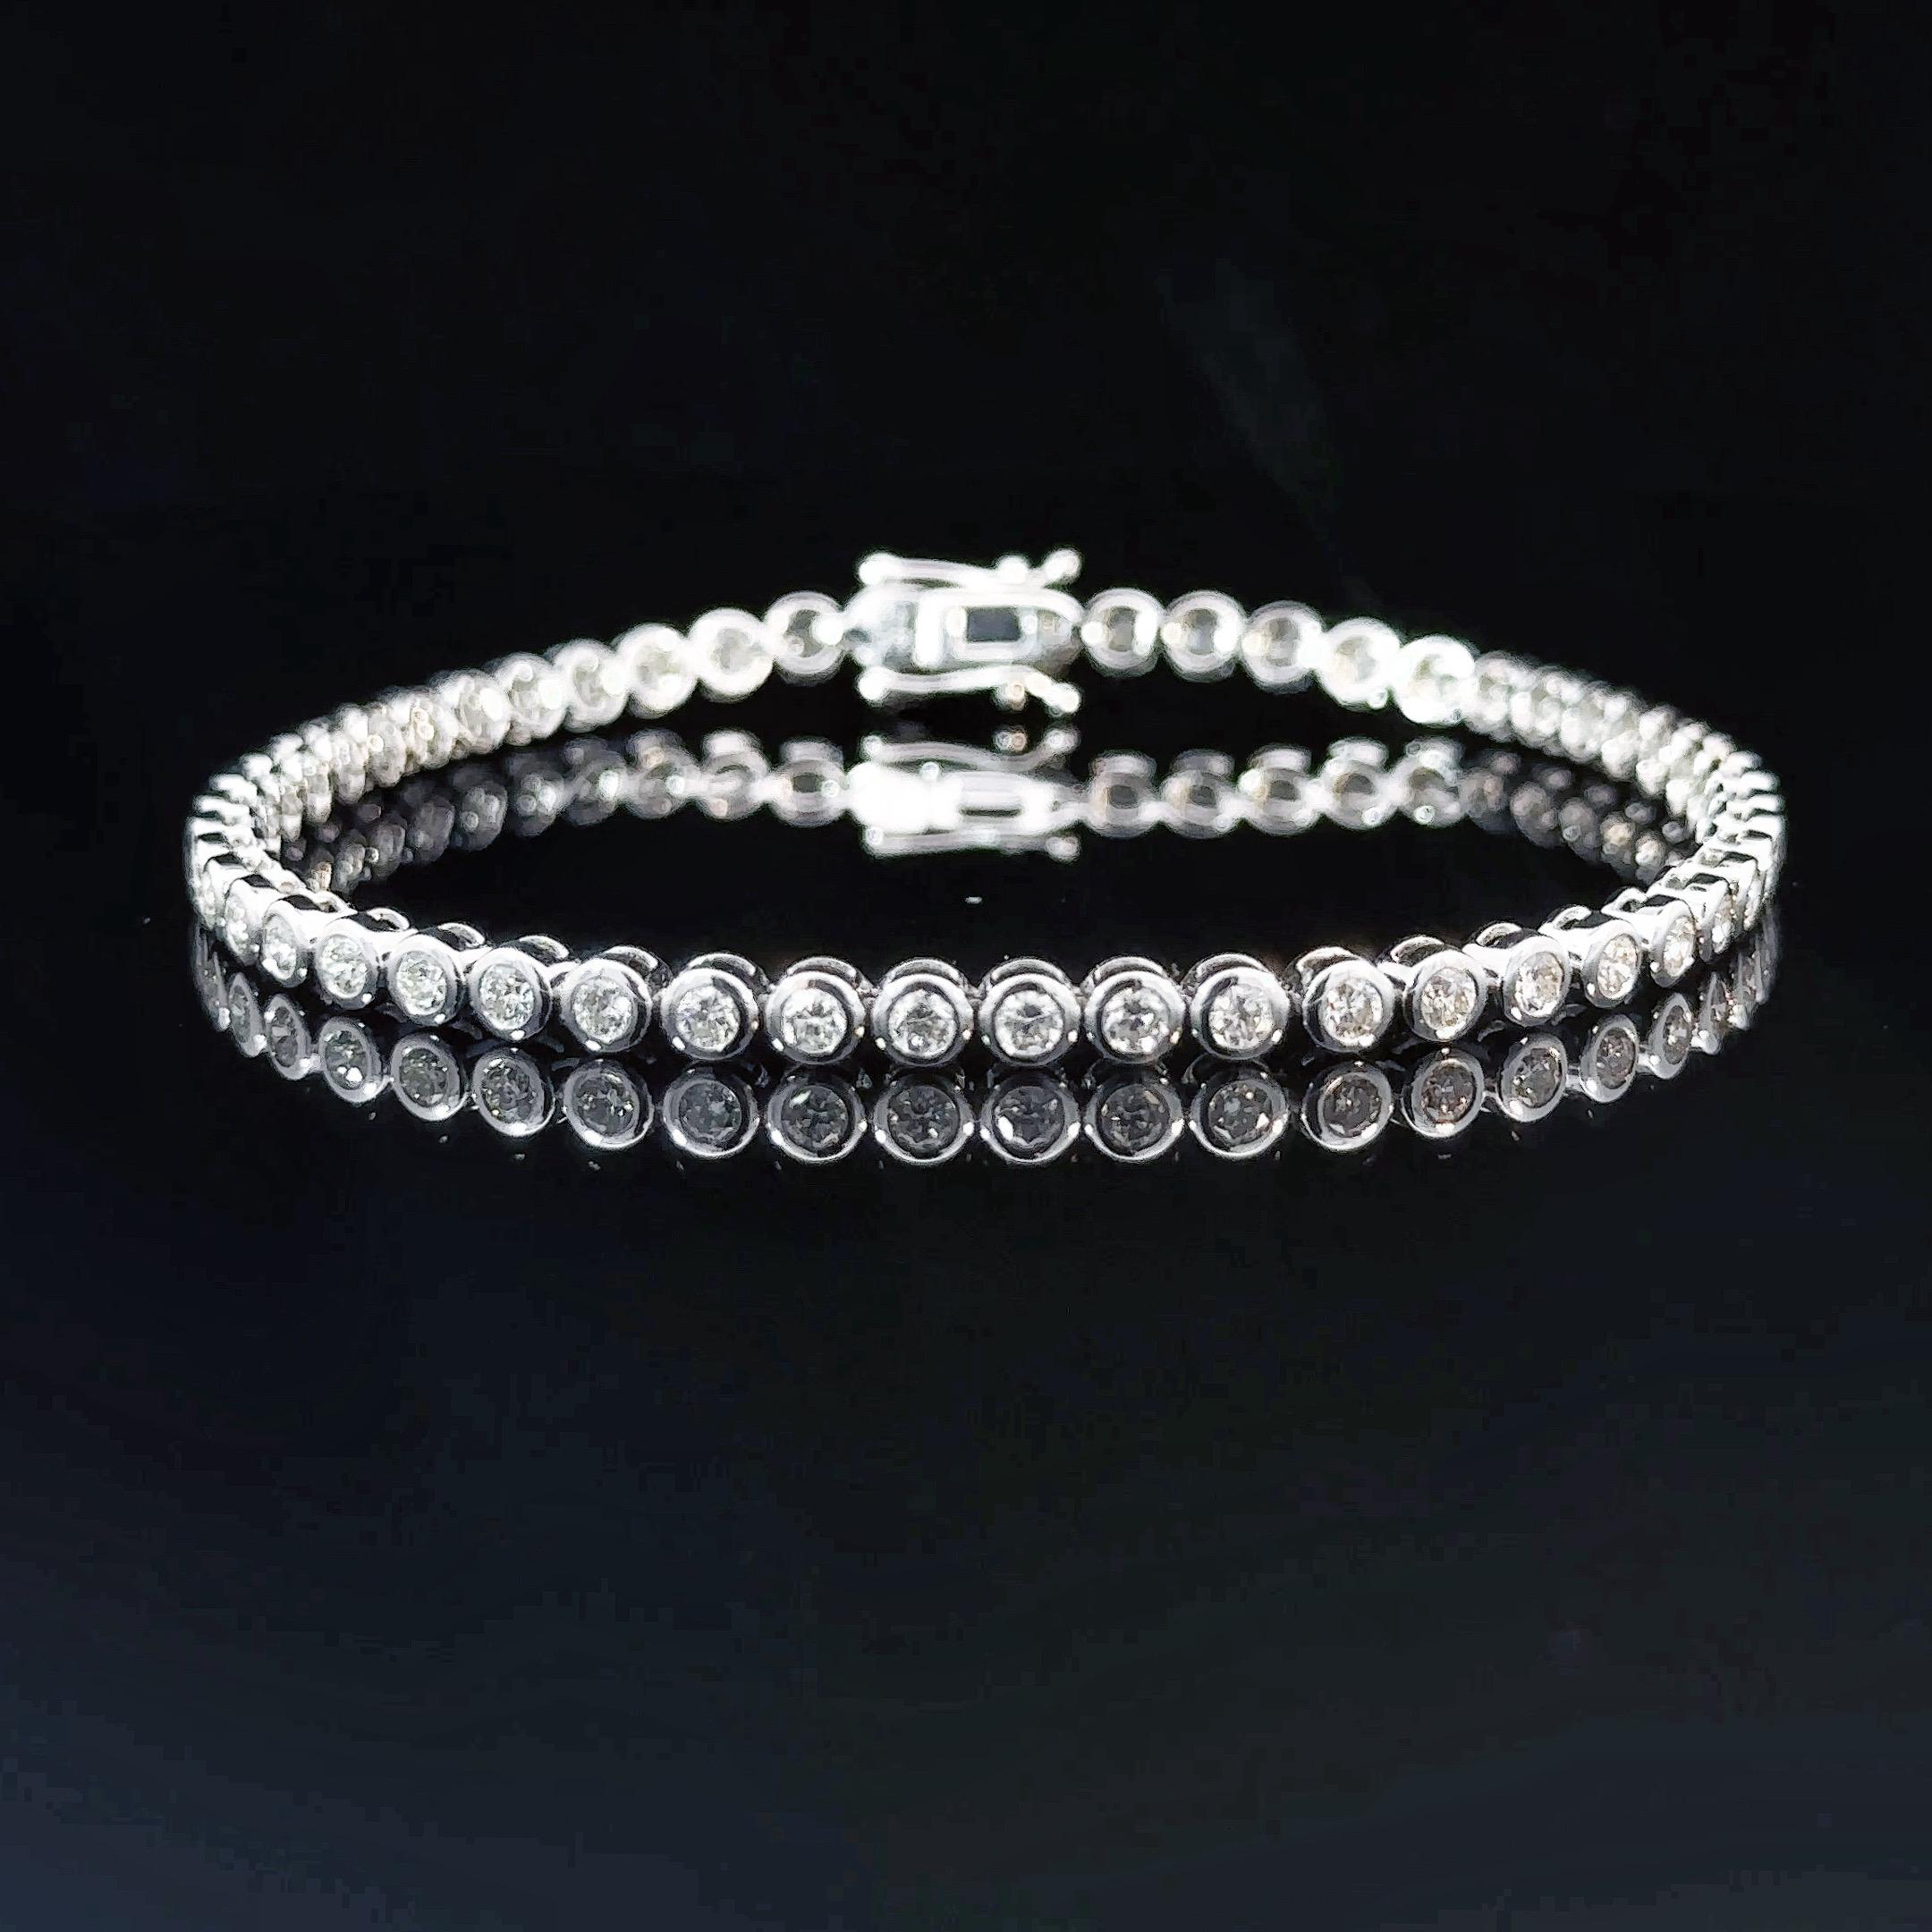 Modern and elegant, this diamond bracelet is part of Xuelai Jewellery London classic lines collection. Composed of a single row of ethically sourced round brilliant diamonds in bezel-setting, their combined weight totals 2.19 carats. Each diamond is